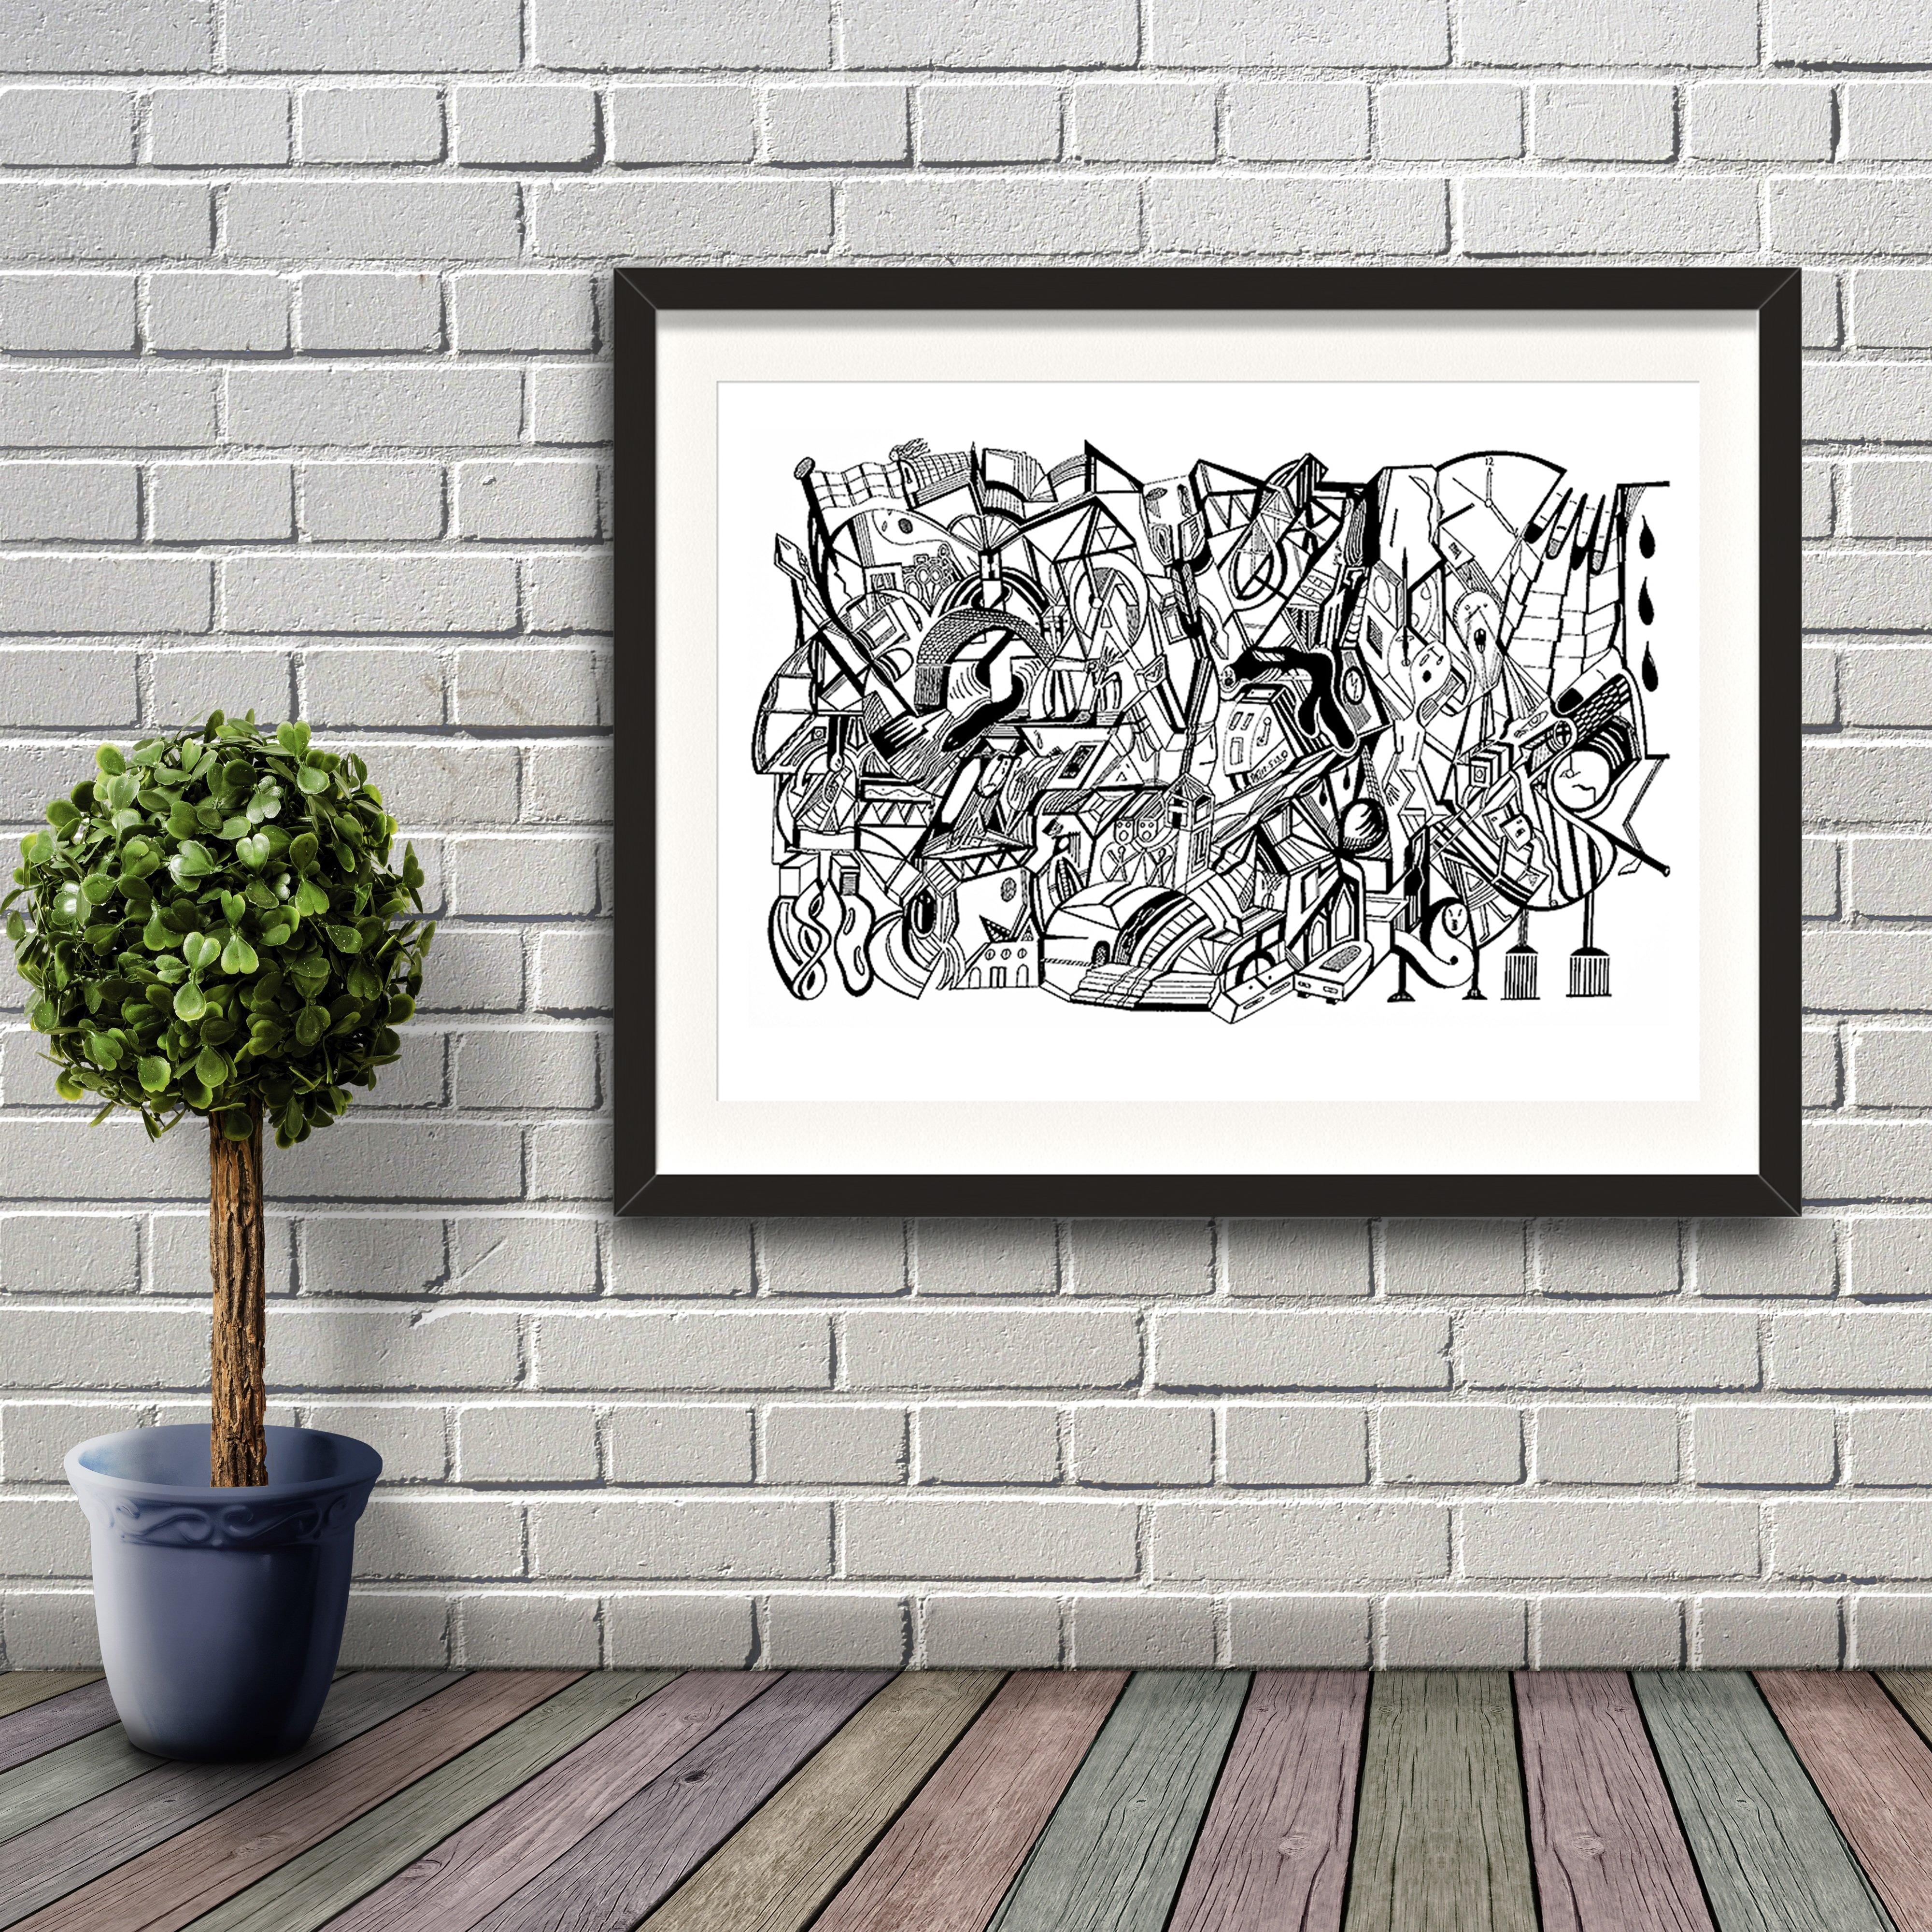 A fine art print from Jason Clarke titled 4 O'Clock Wall drawn with a black Pentel pen. Dated 17/05/13. Artwork shown in a black frame hanging on a brick wall.